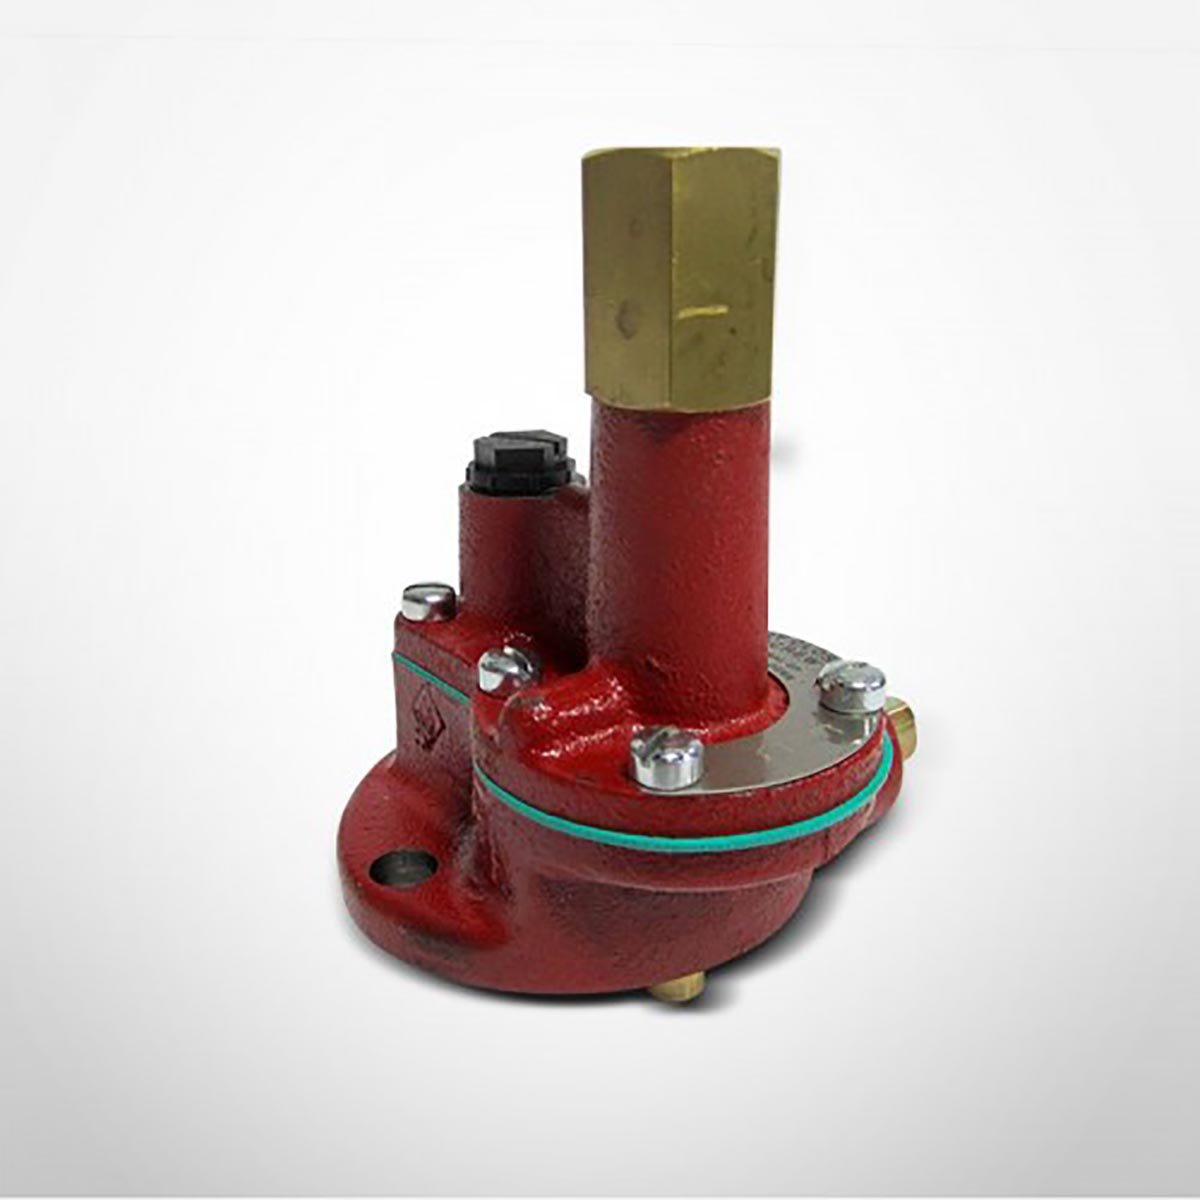 Veeder-Root Adjustable Functional Element For Non Ag Pumps